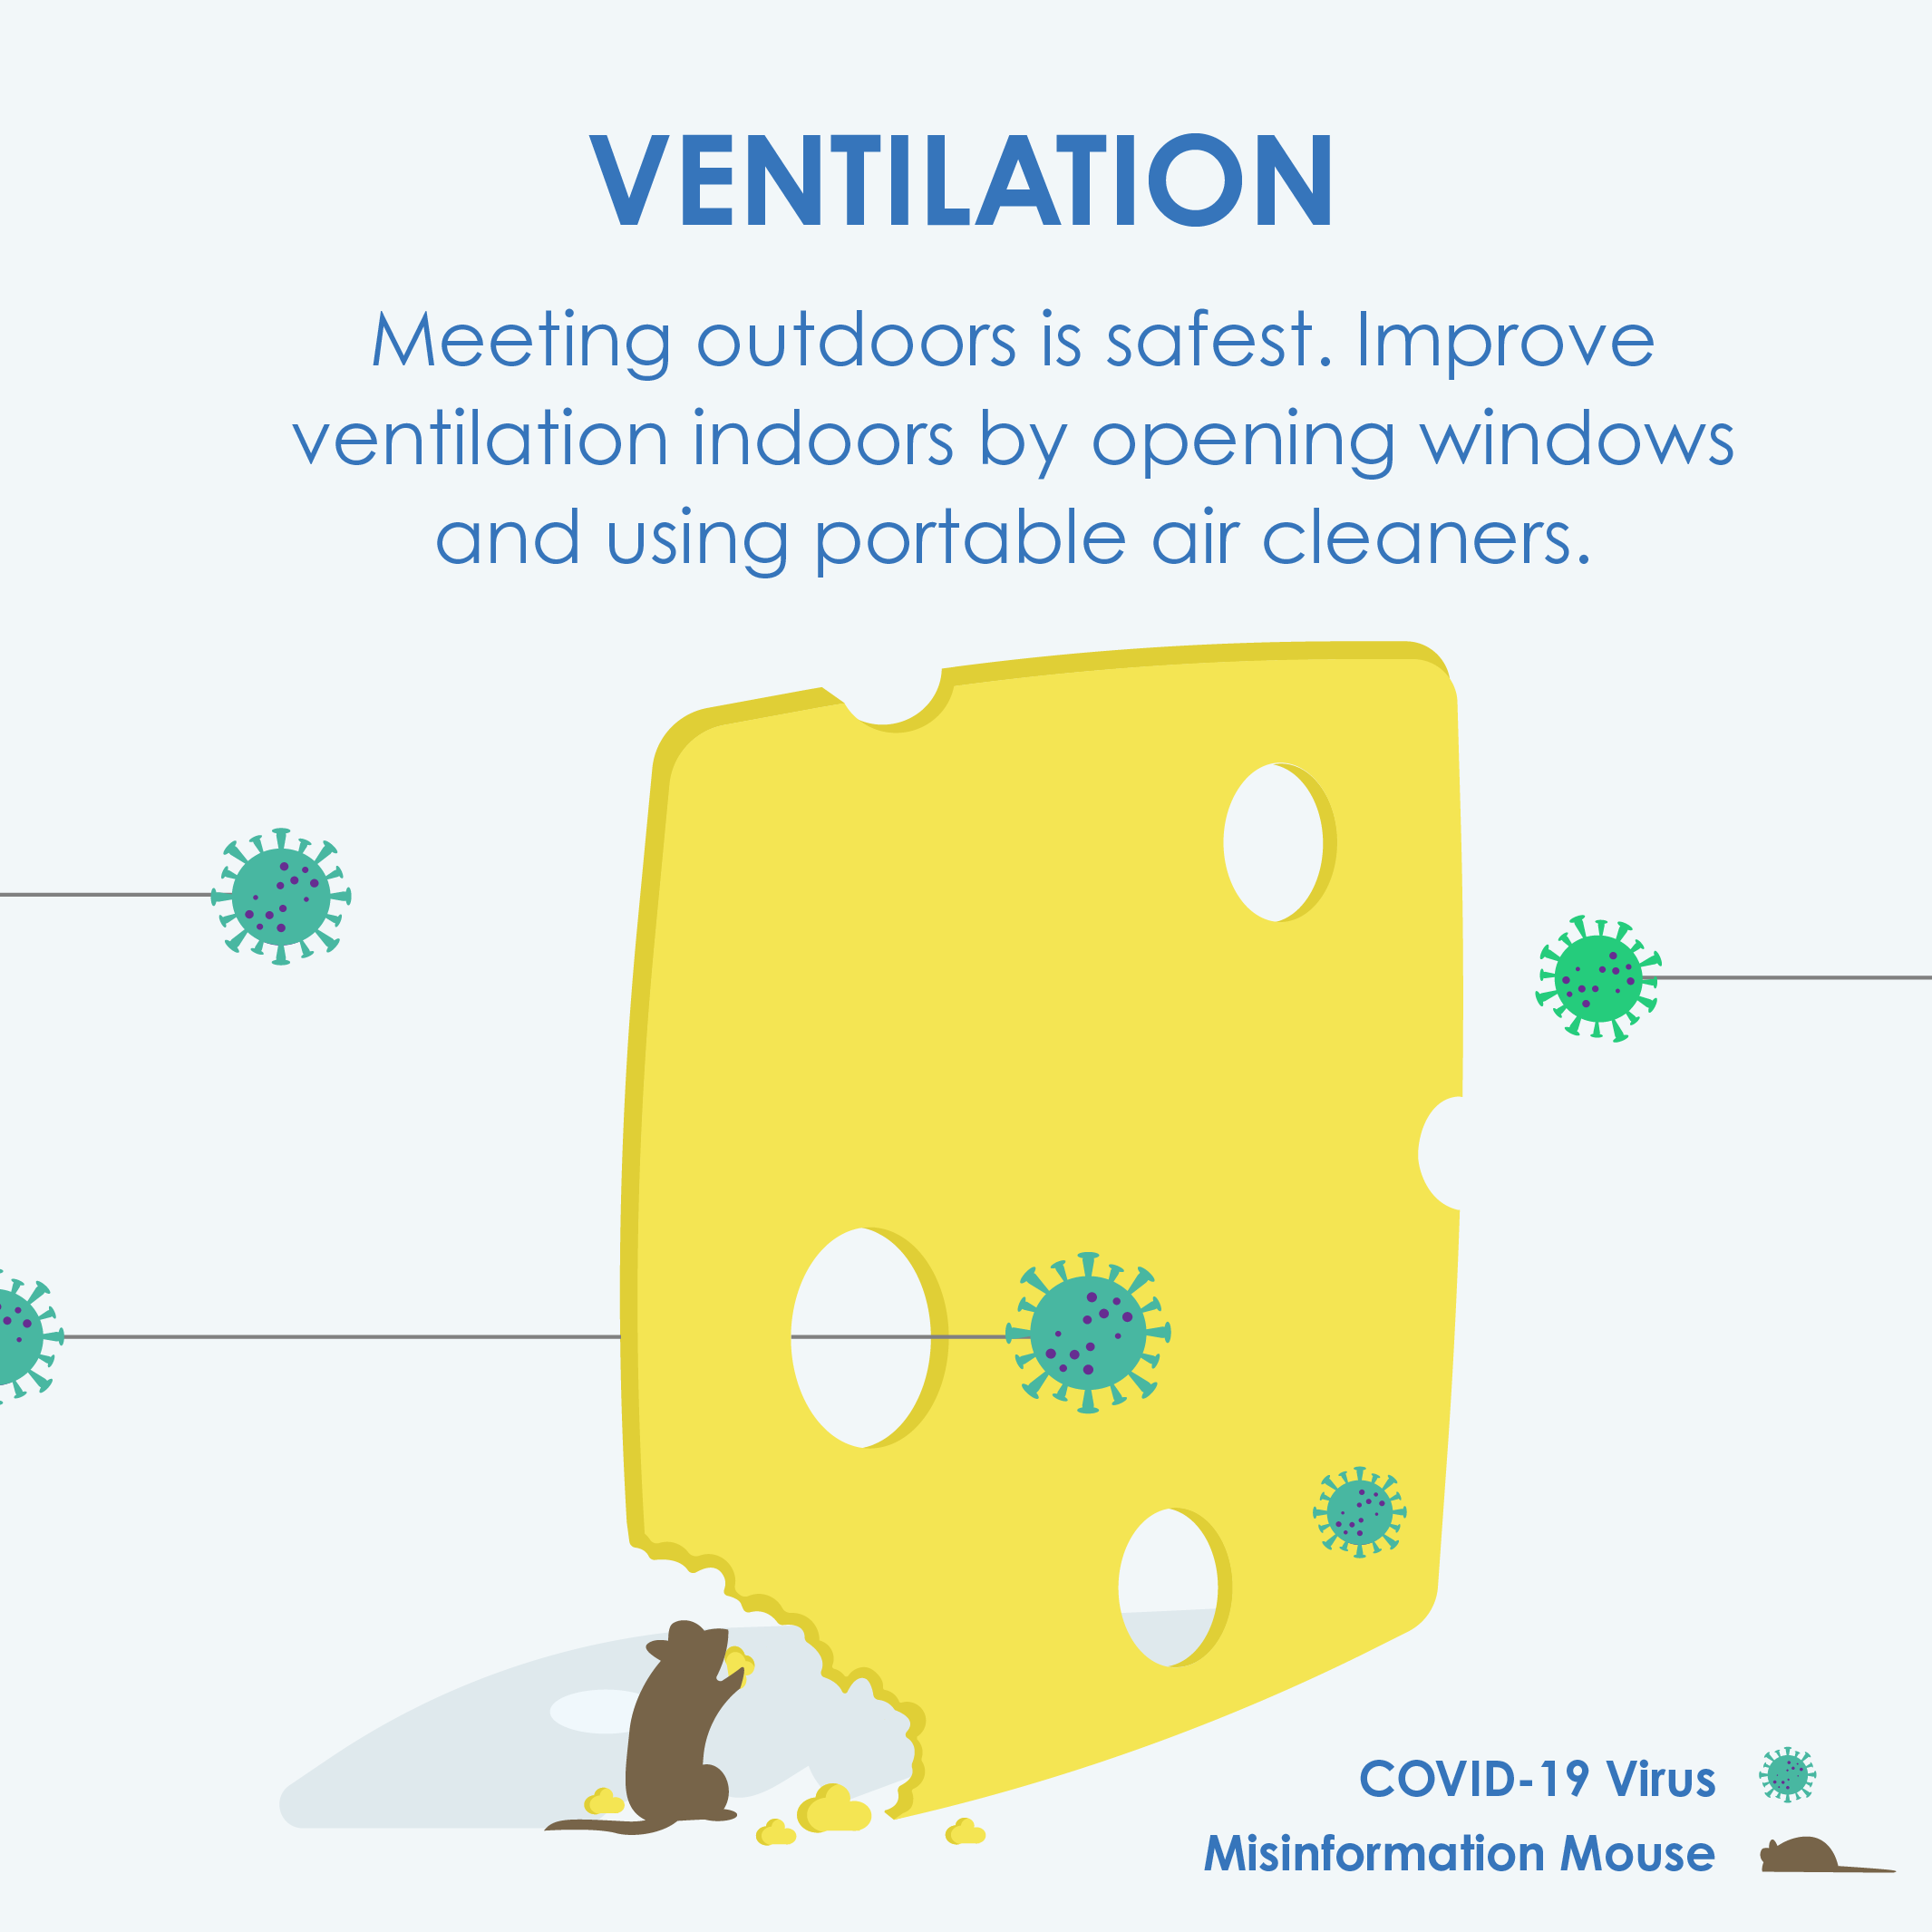 Ventilation. Meeting outdoors is safest. Improve ventilation indoors by opening windows and using portable aire cleaners.